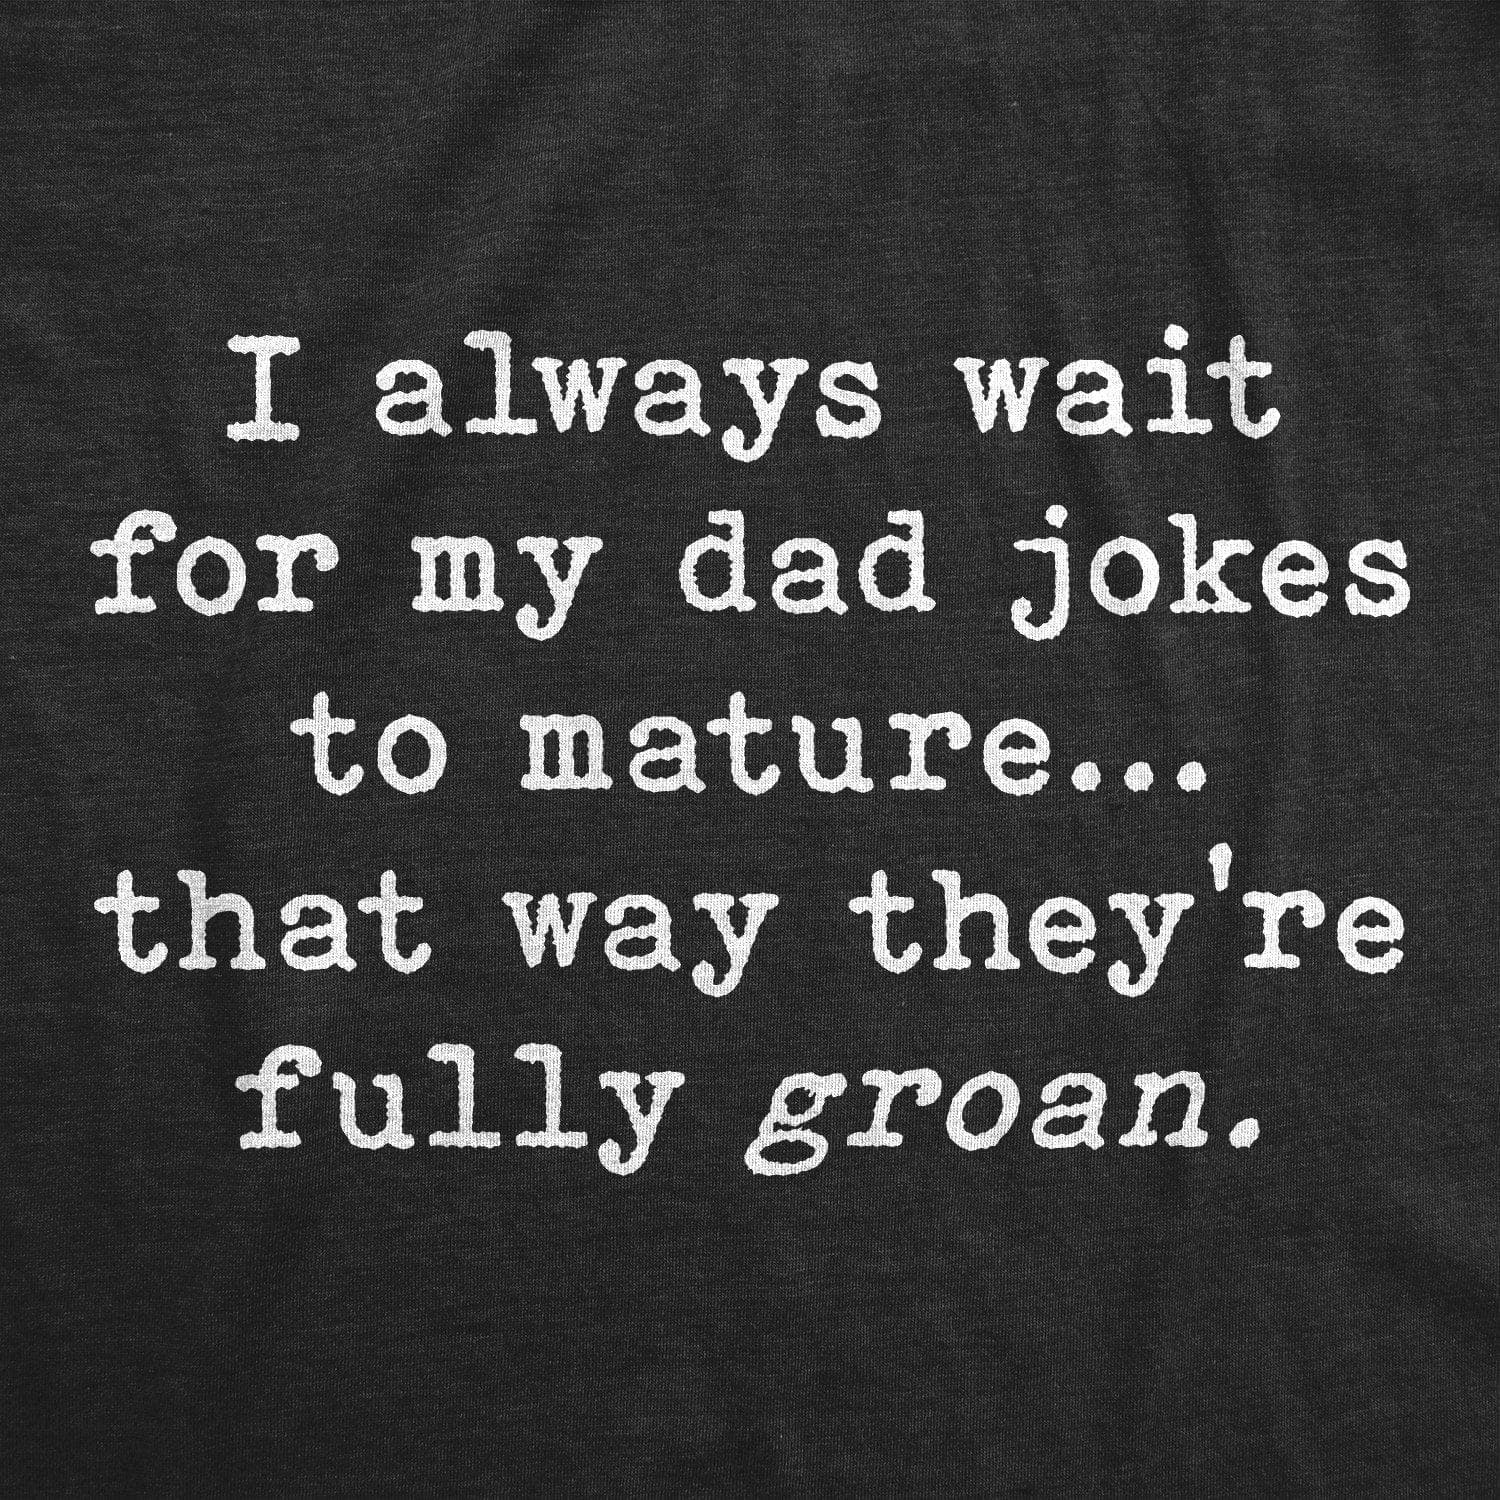 I Always Wait For My Dad Jokes To Mature That Way They're Fully Groan Men's Tshirt - Crazy Dog T-Shirts